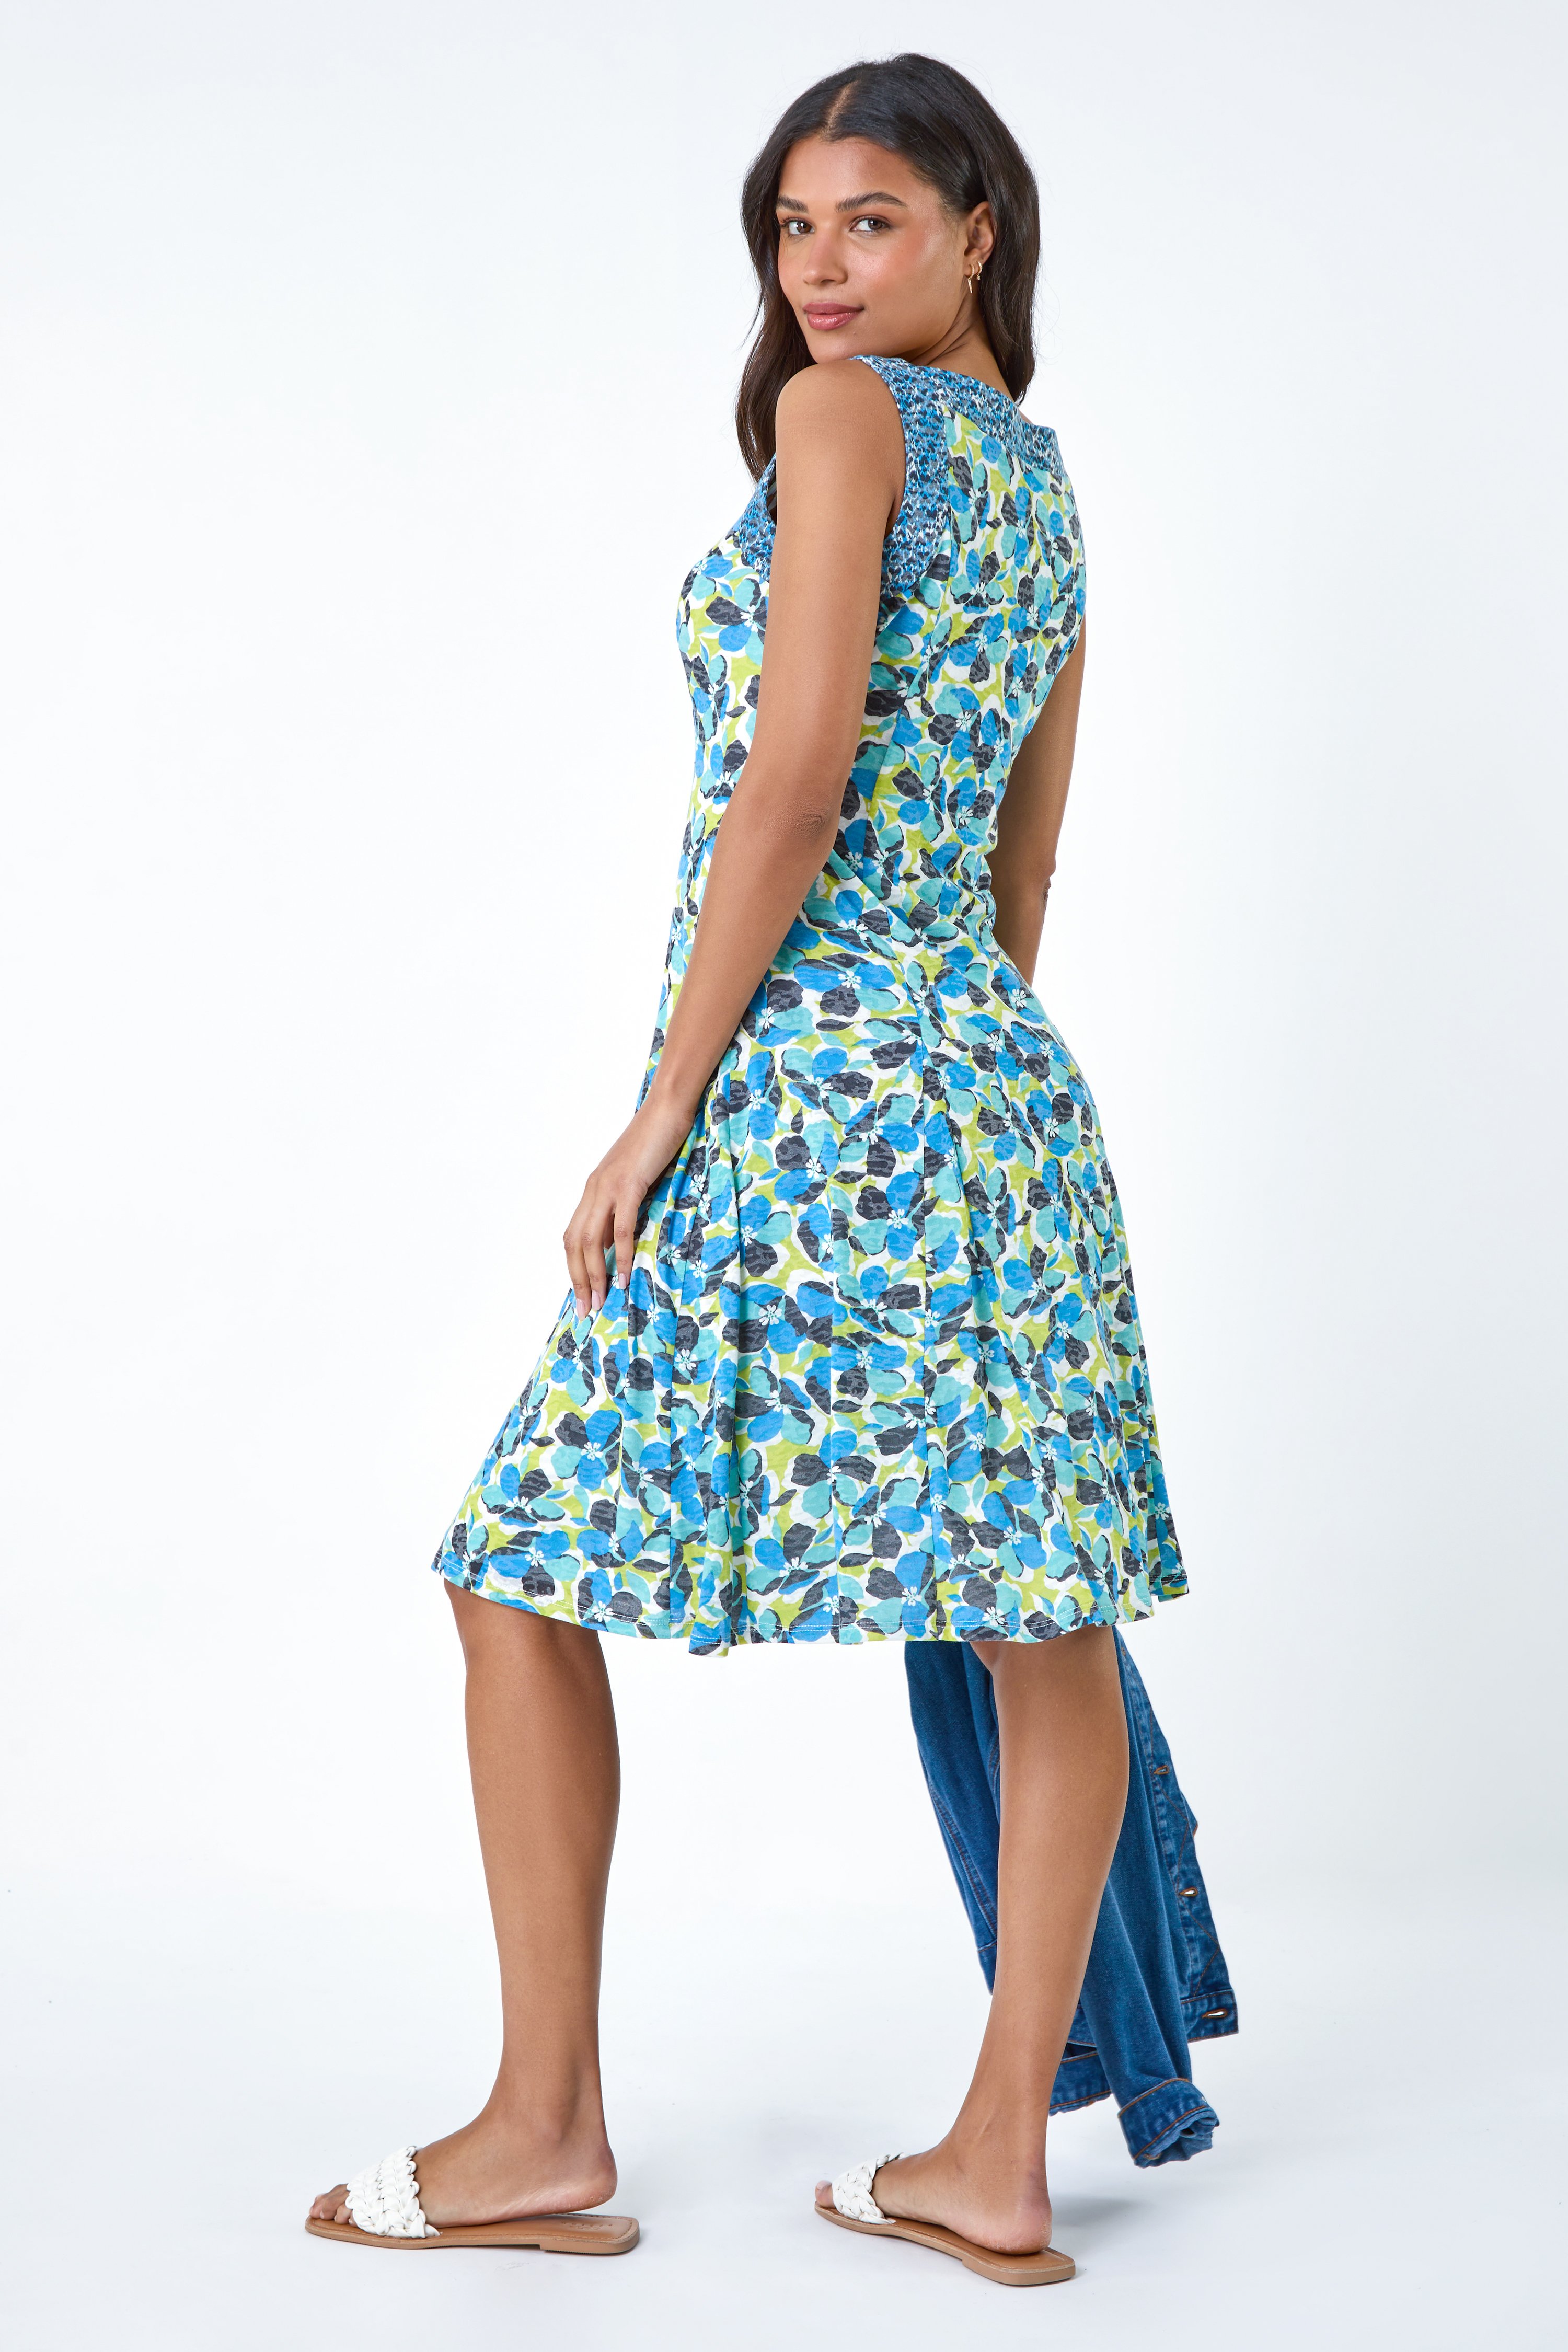 Blue Sleeveless Contrast Floral Print Dress, Image 3 of 5